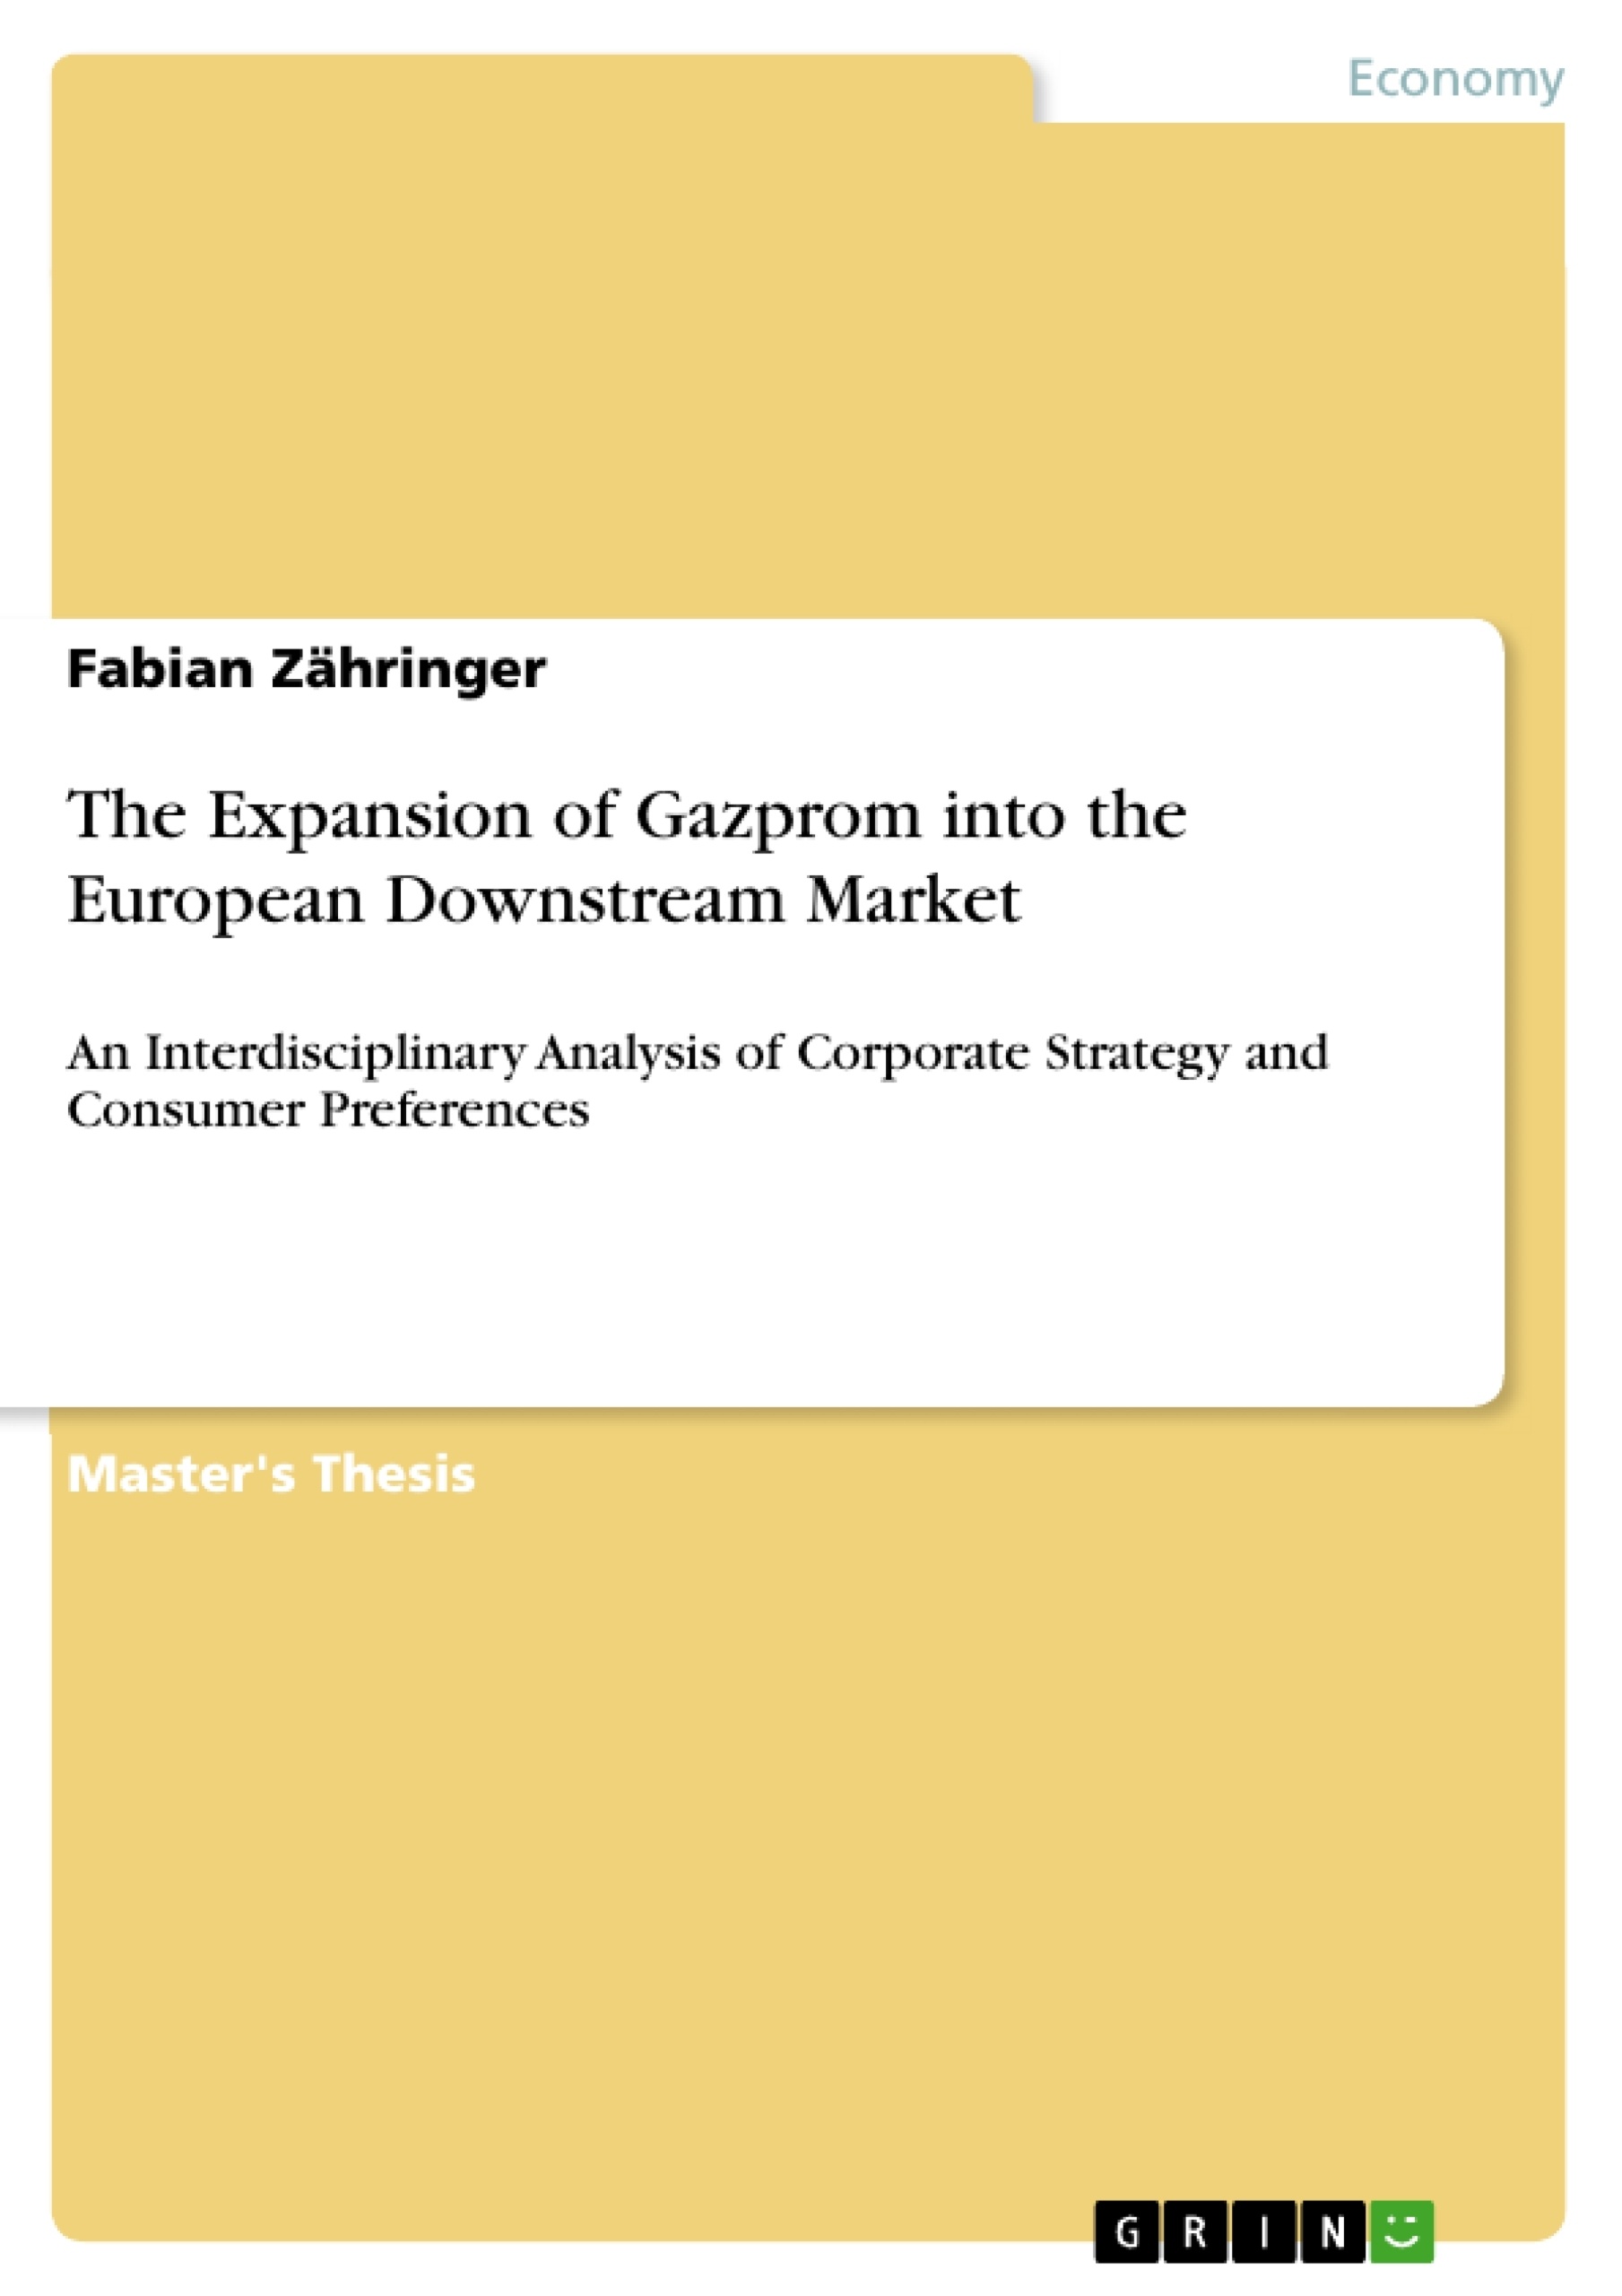 Title: The Expansion of Gazprom into the European Downstream Market